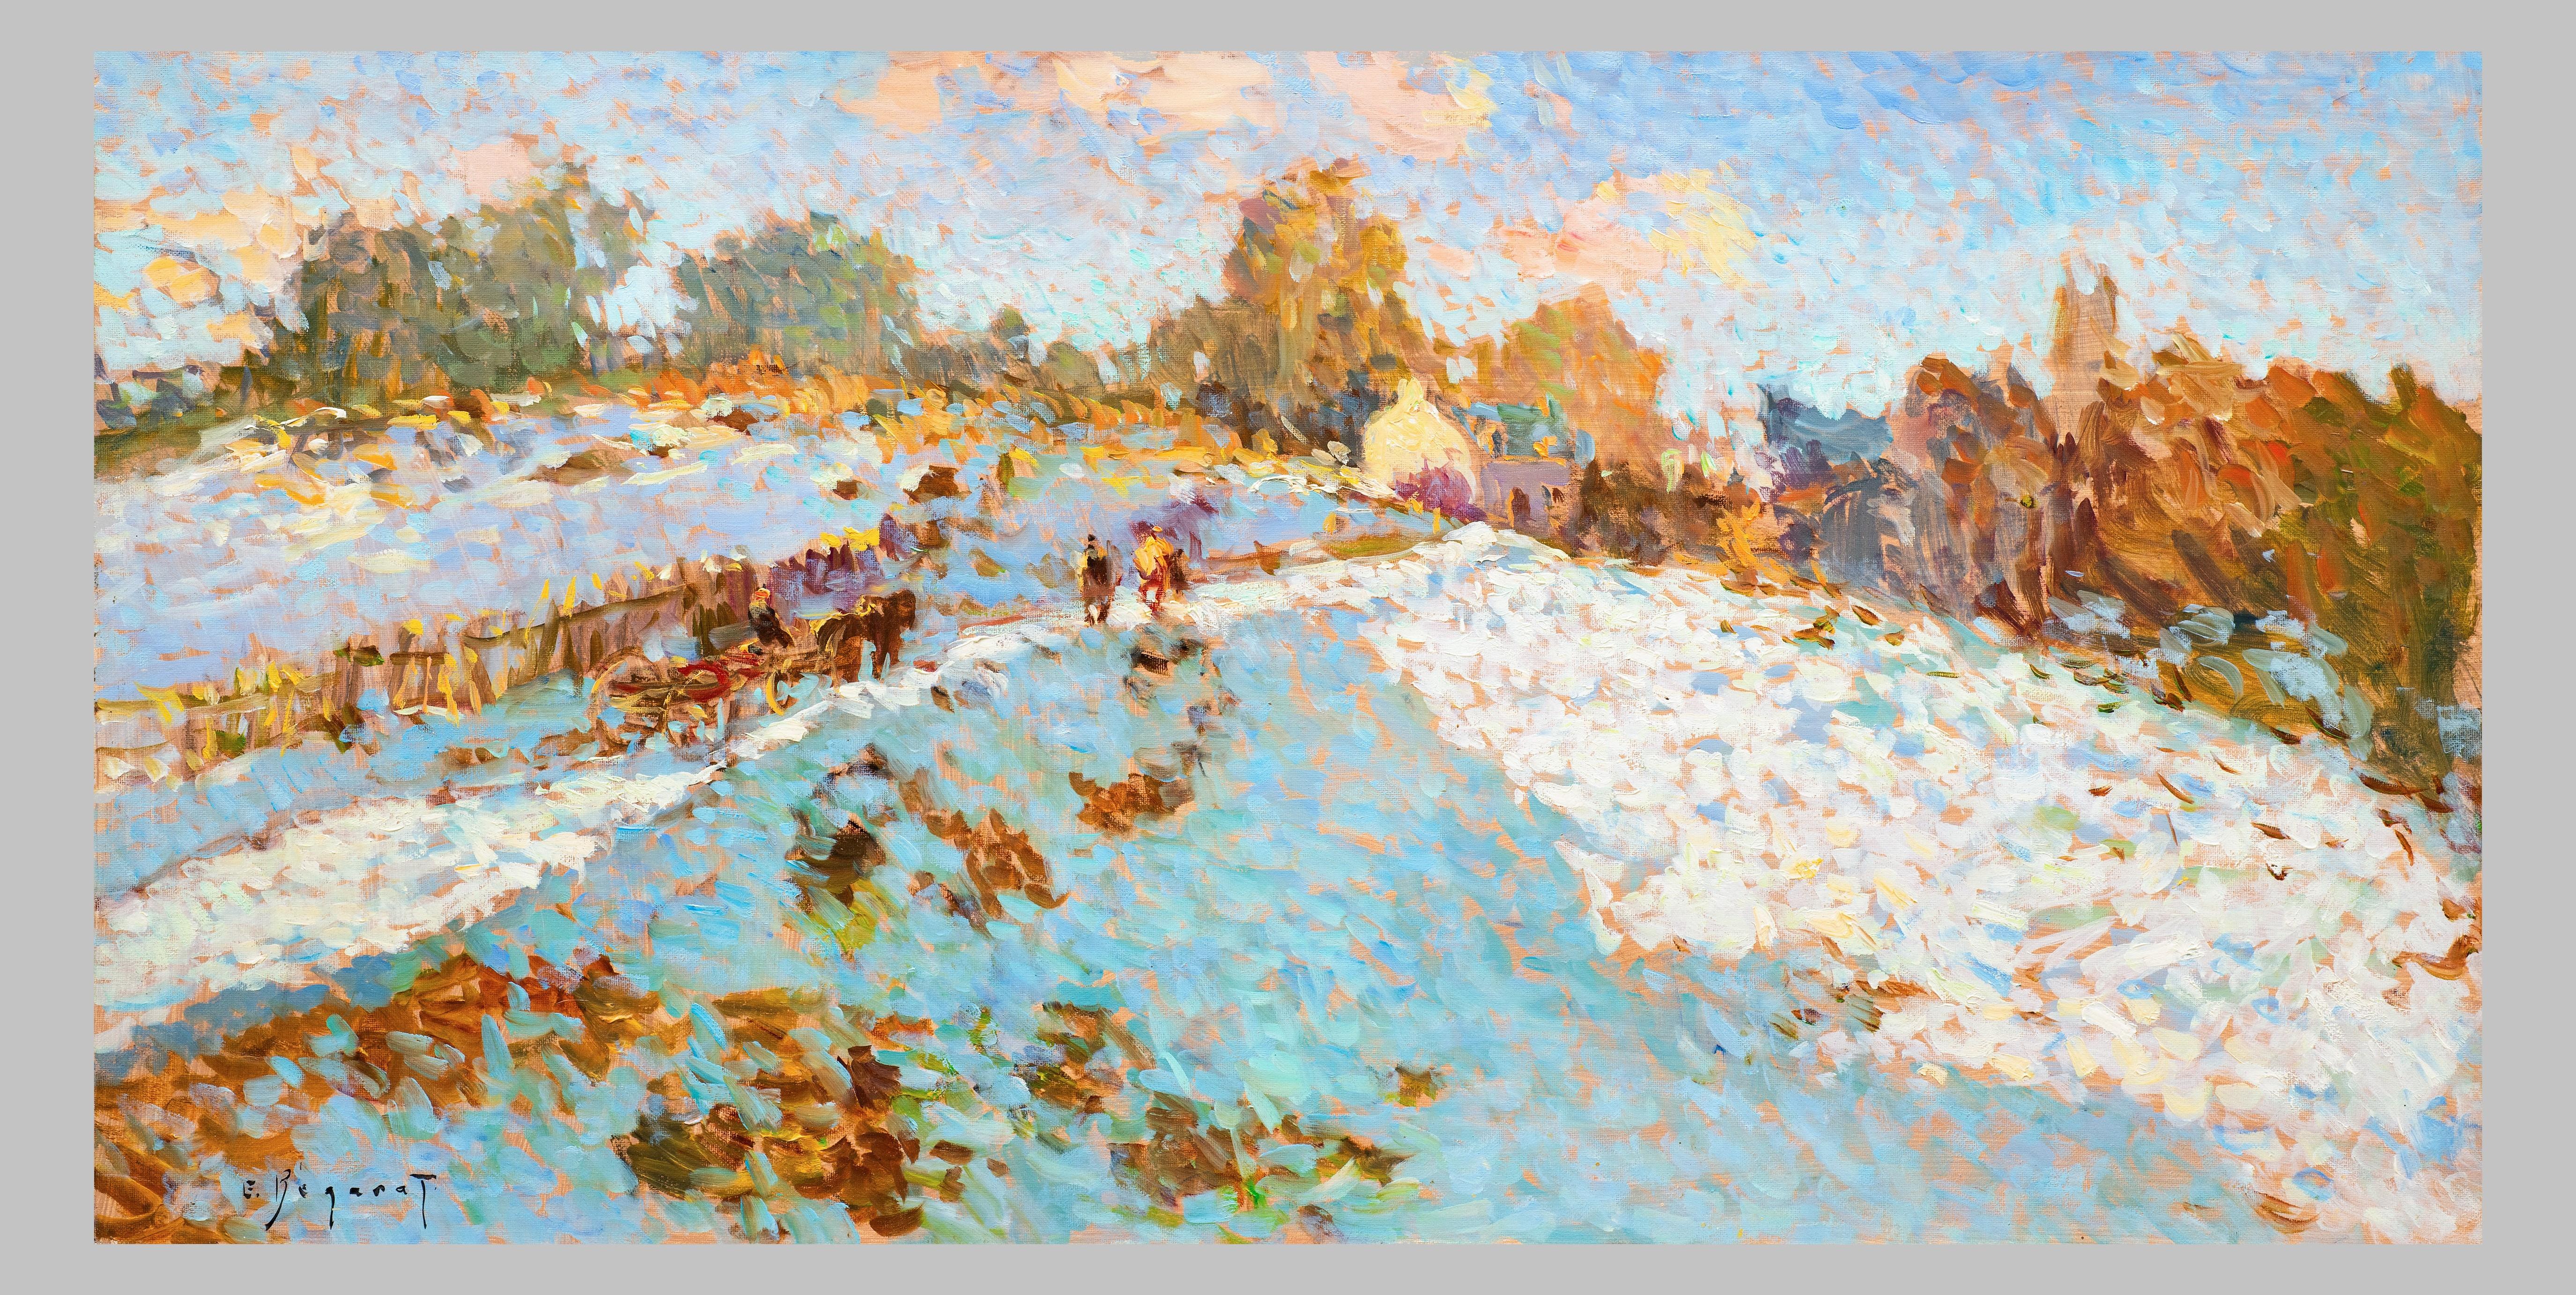 Pointillist Painting 
"The Road Beneath the Snow (Le Chemin Sous la Neige)"
Eugène Bégarat (French, 1943)
Oil on canvas
15 3/4 x 31 1/2 inches

Saturated with winter's light glinting off the snow making sparkling jewels from the refracting sunshine.